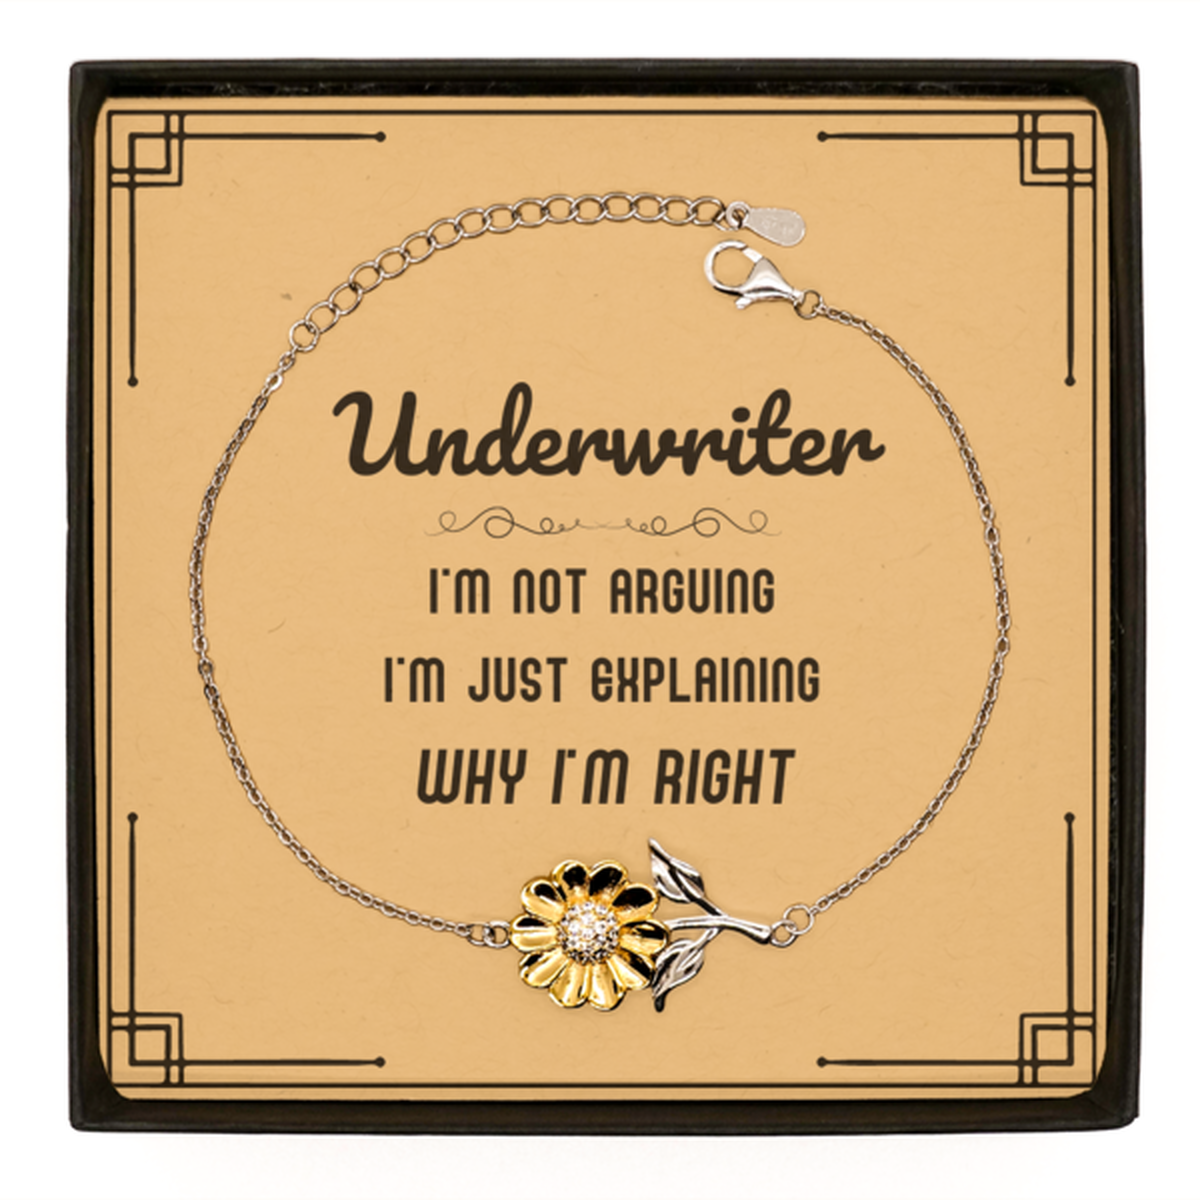 Underwriter I'm not Arguing. I'm Just Explaining Why I'm RIGHT Sunflower Bracelet, Funny Saying Quote Underwriter Gifts For Underwriter Message Card Graduation Birthday Christmas Gifts for Men Women Coworker